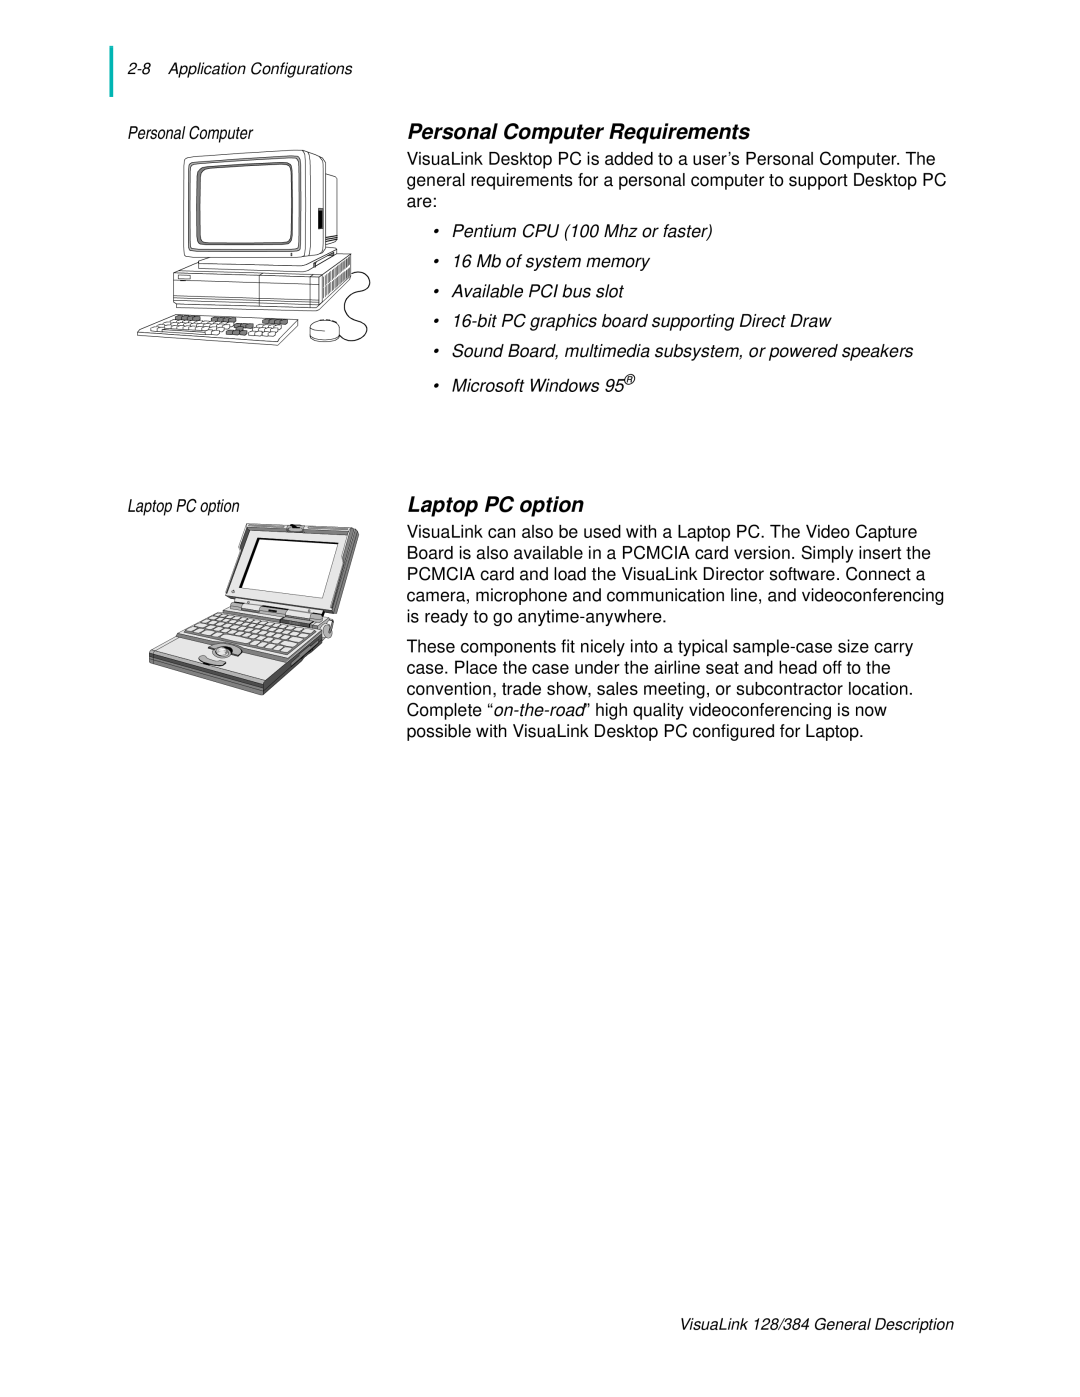 NEC 128 manual Personal Computer Requirements, Laptop PC option 